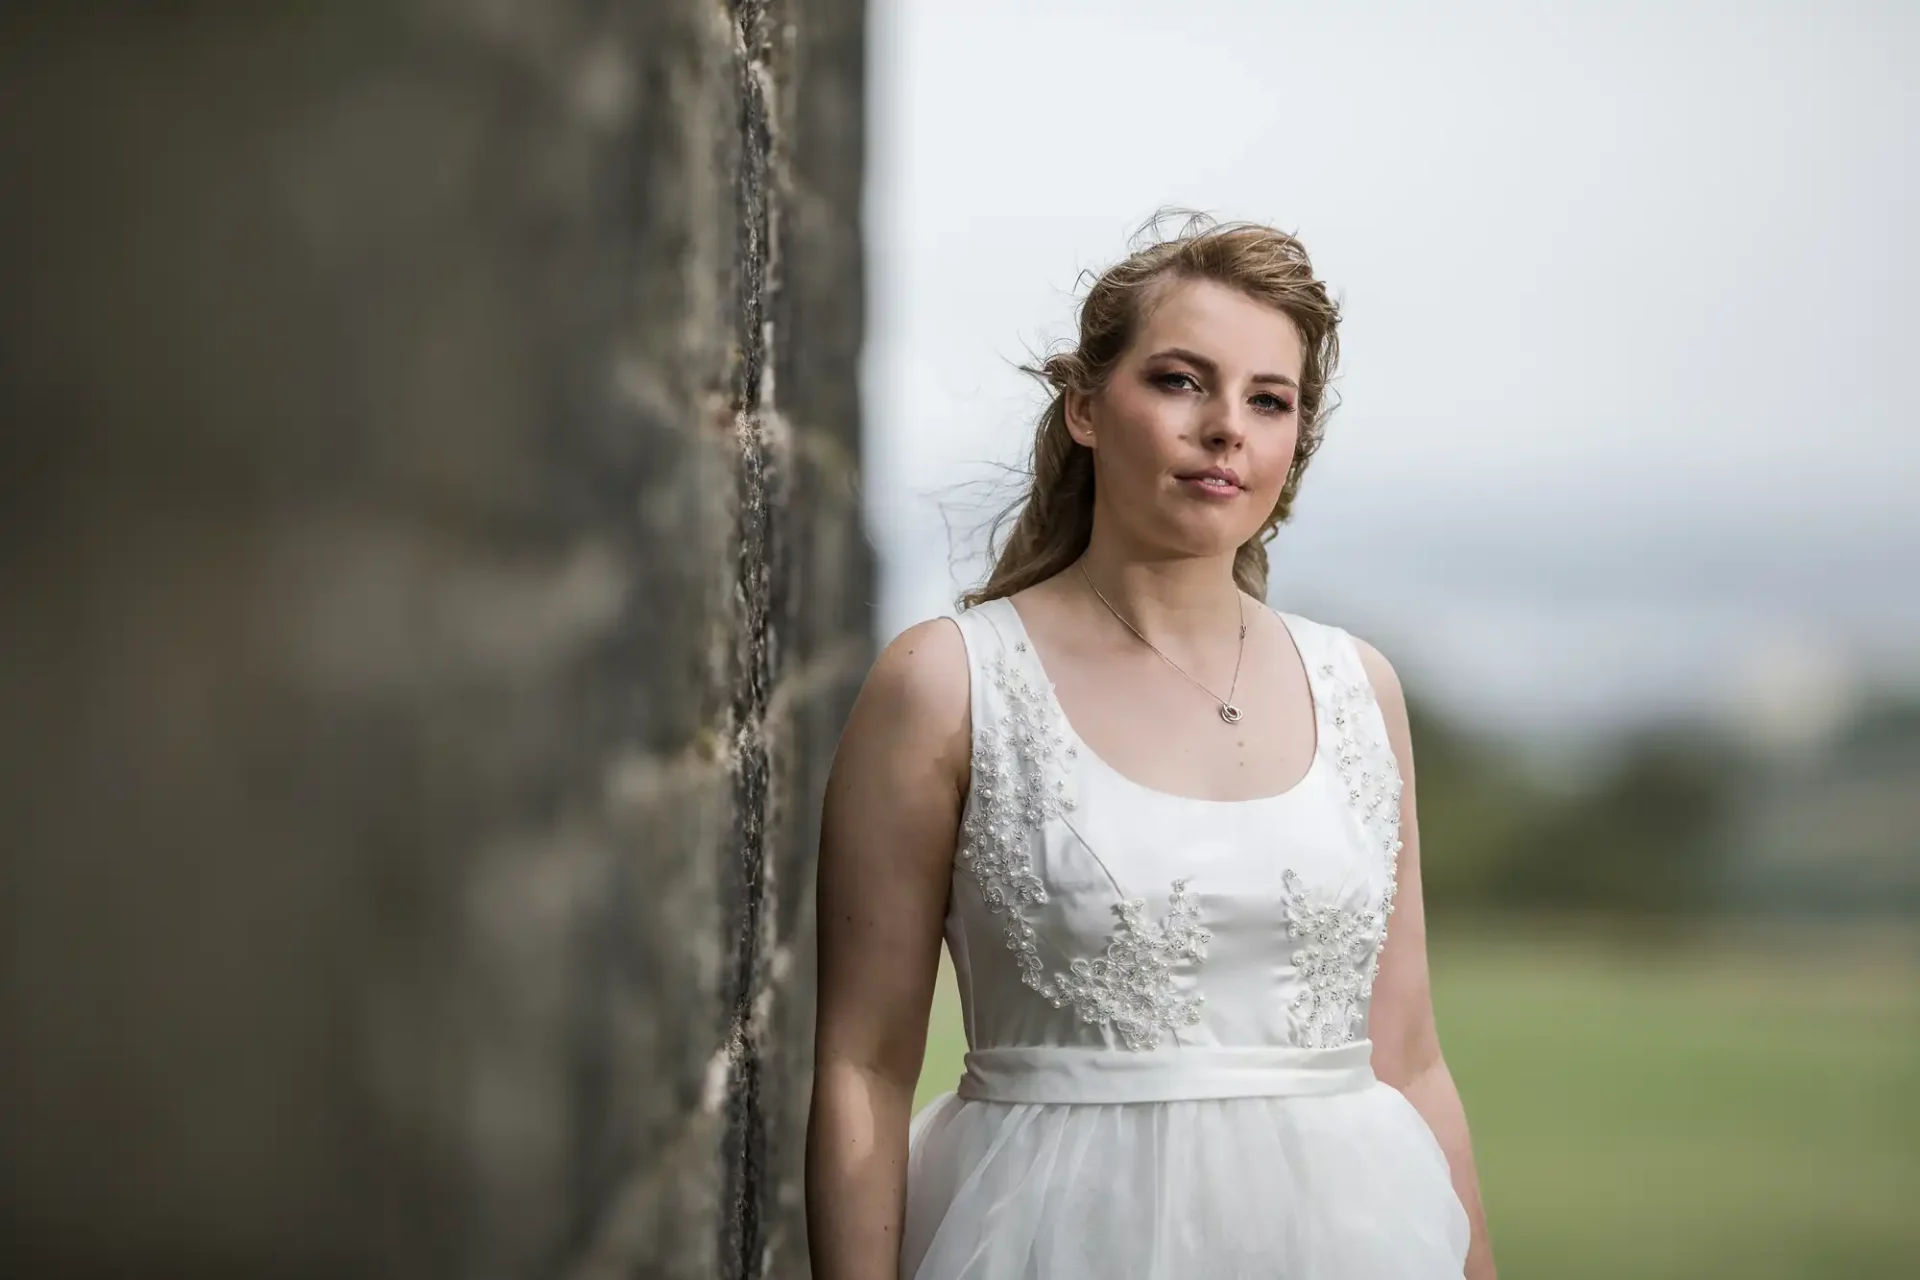 A woman in a white bridal gown stands beside a stone wall, her hair styled in an updo, looking pensively into the distance with a blurred natural background.